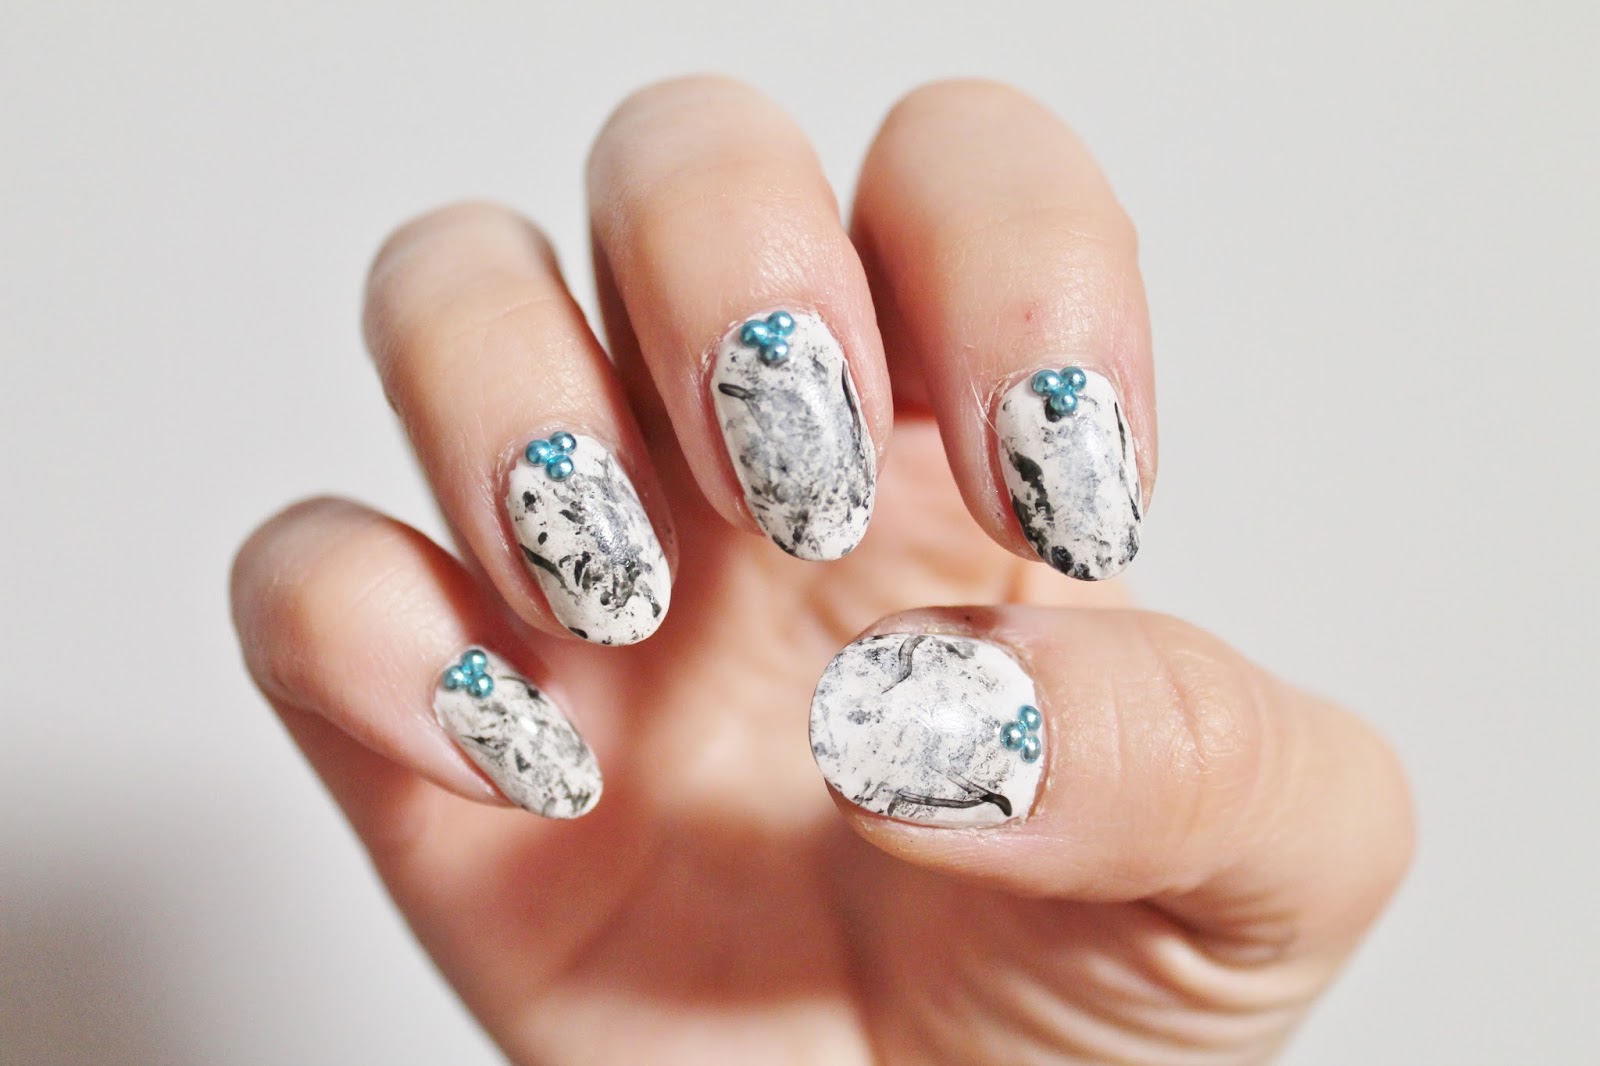 10. Watercolor and Marble Nail Art for Girls - wide 7